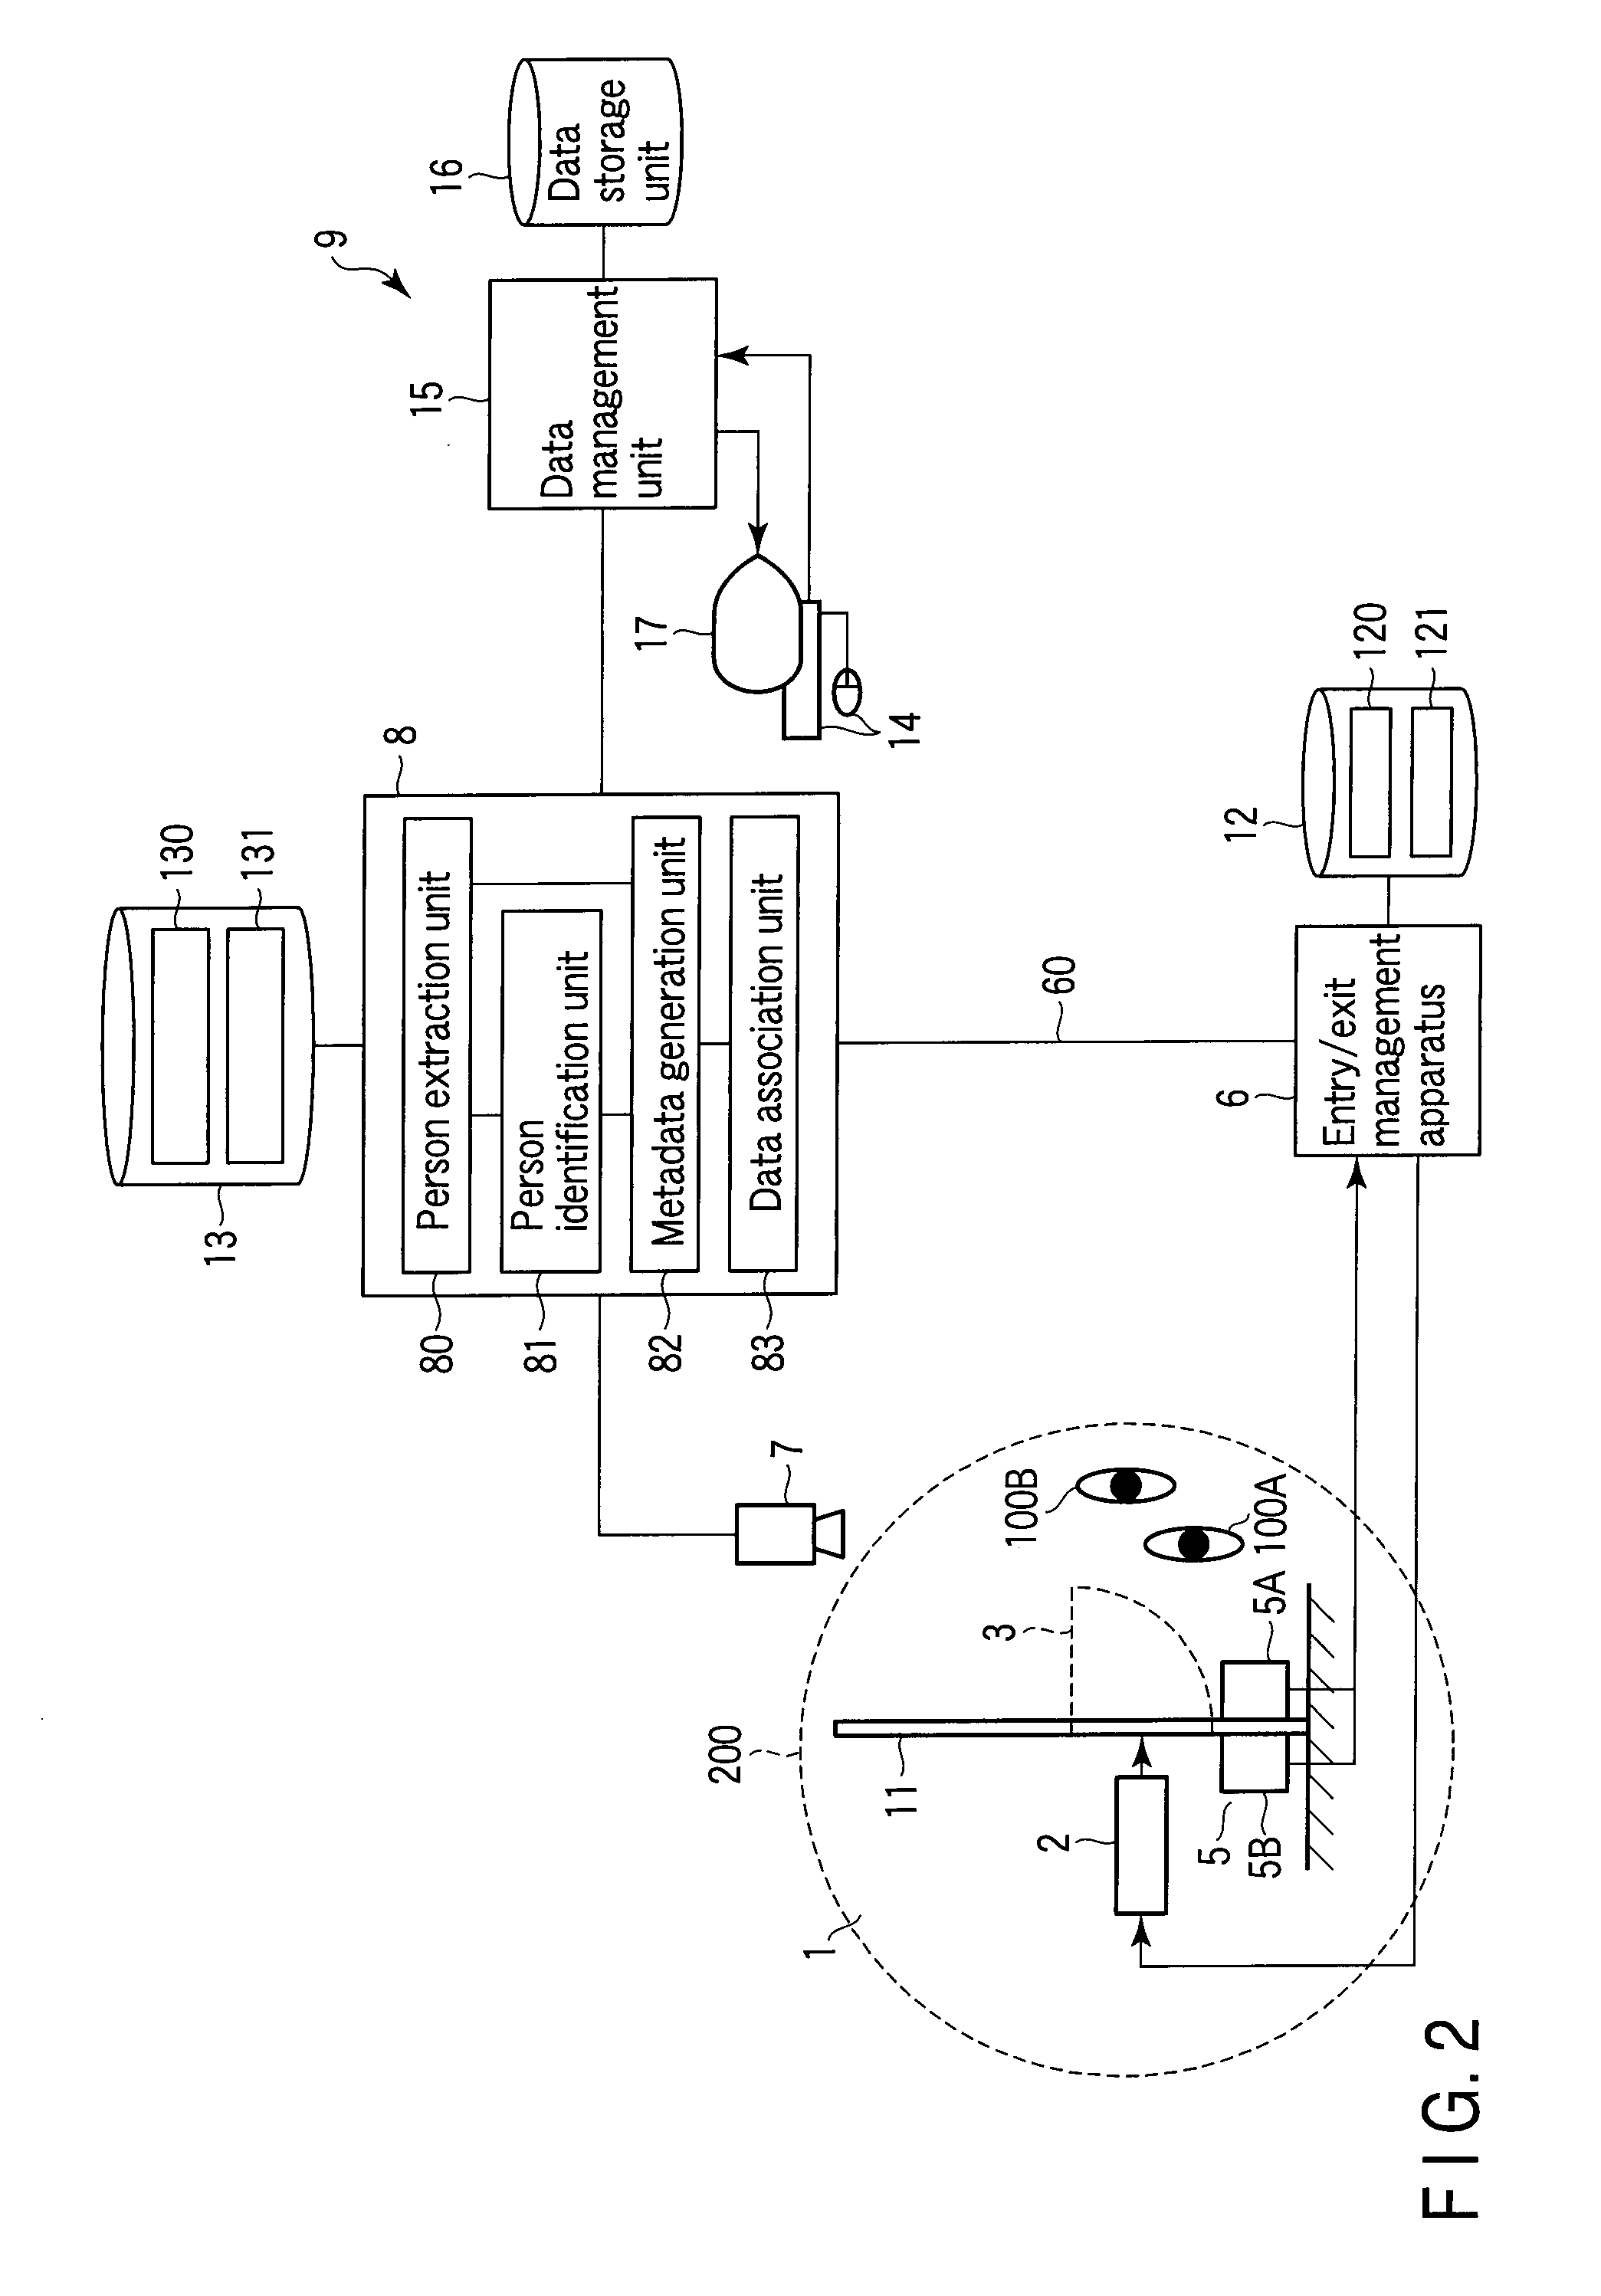 System for monitoring persons by using cameras